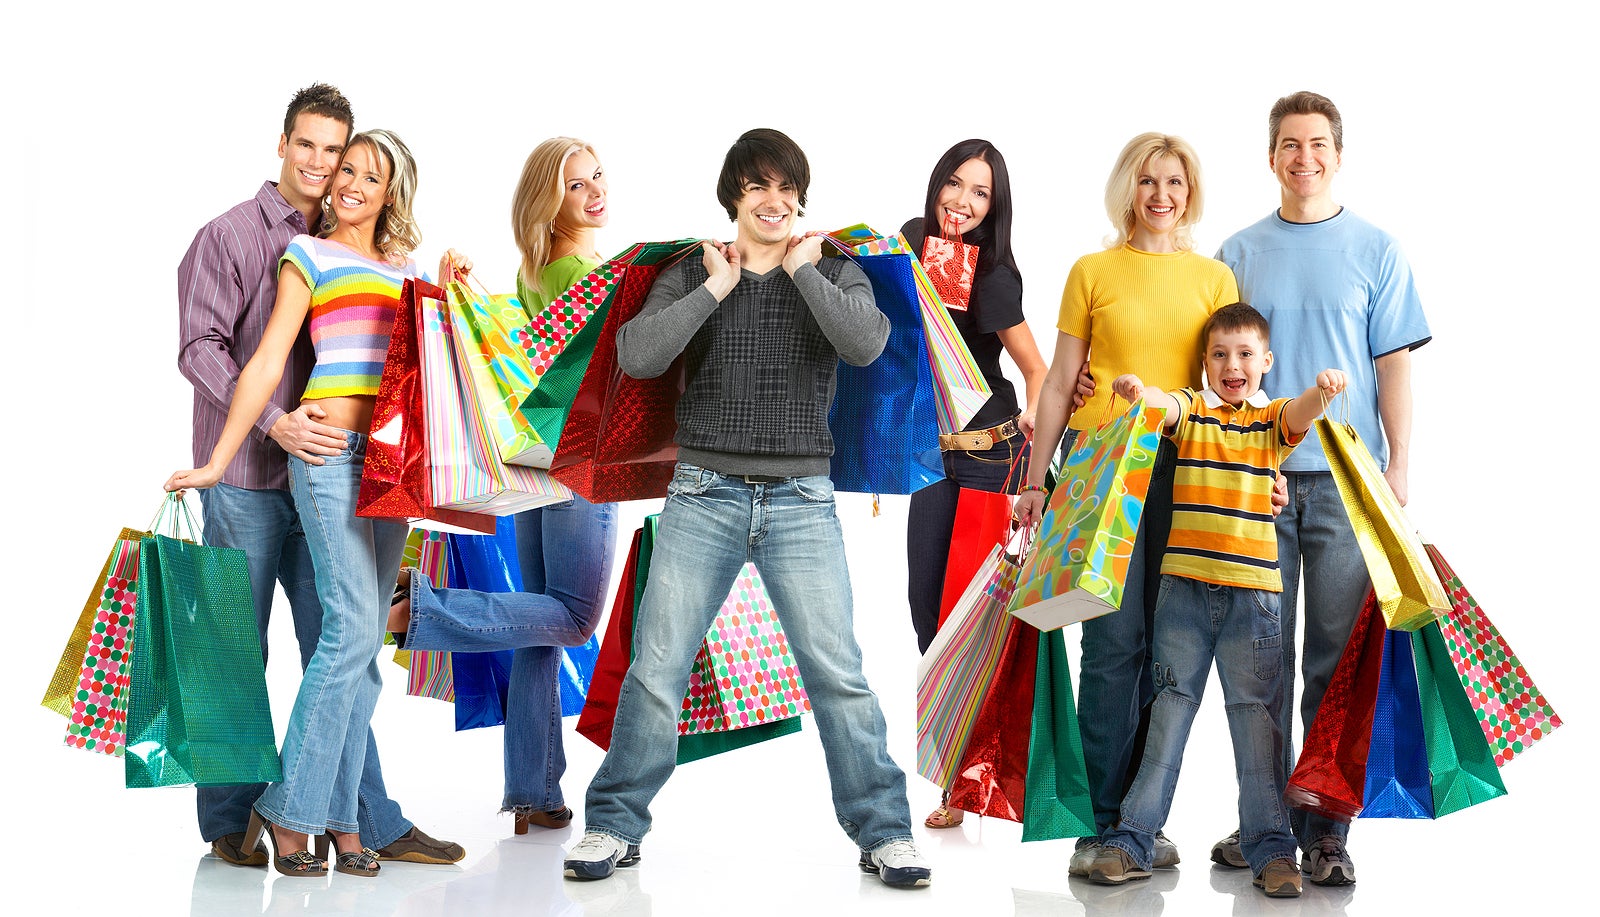 Happy shopping people. Isolated over white background